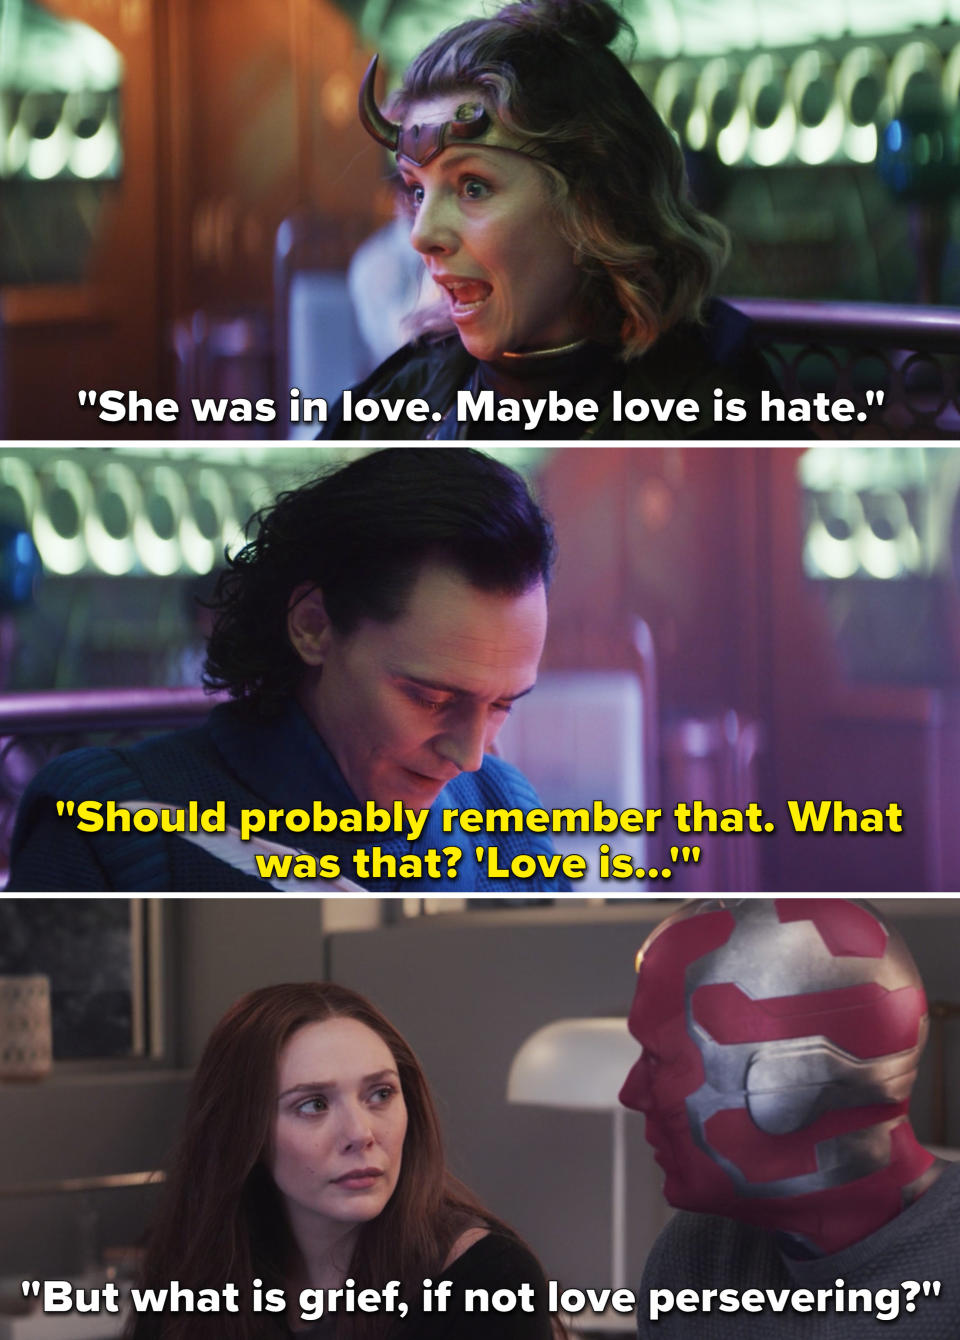 Later on, Loki also compares love to a dagger.